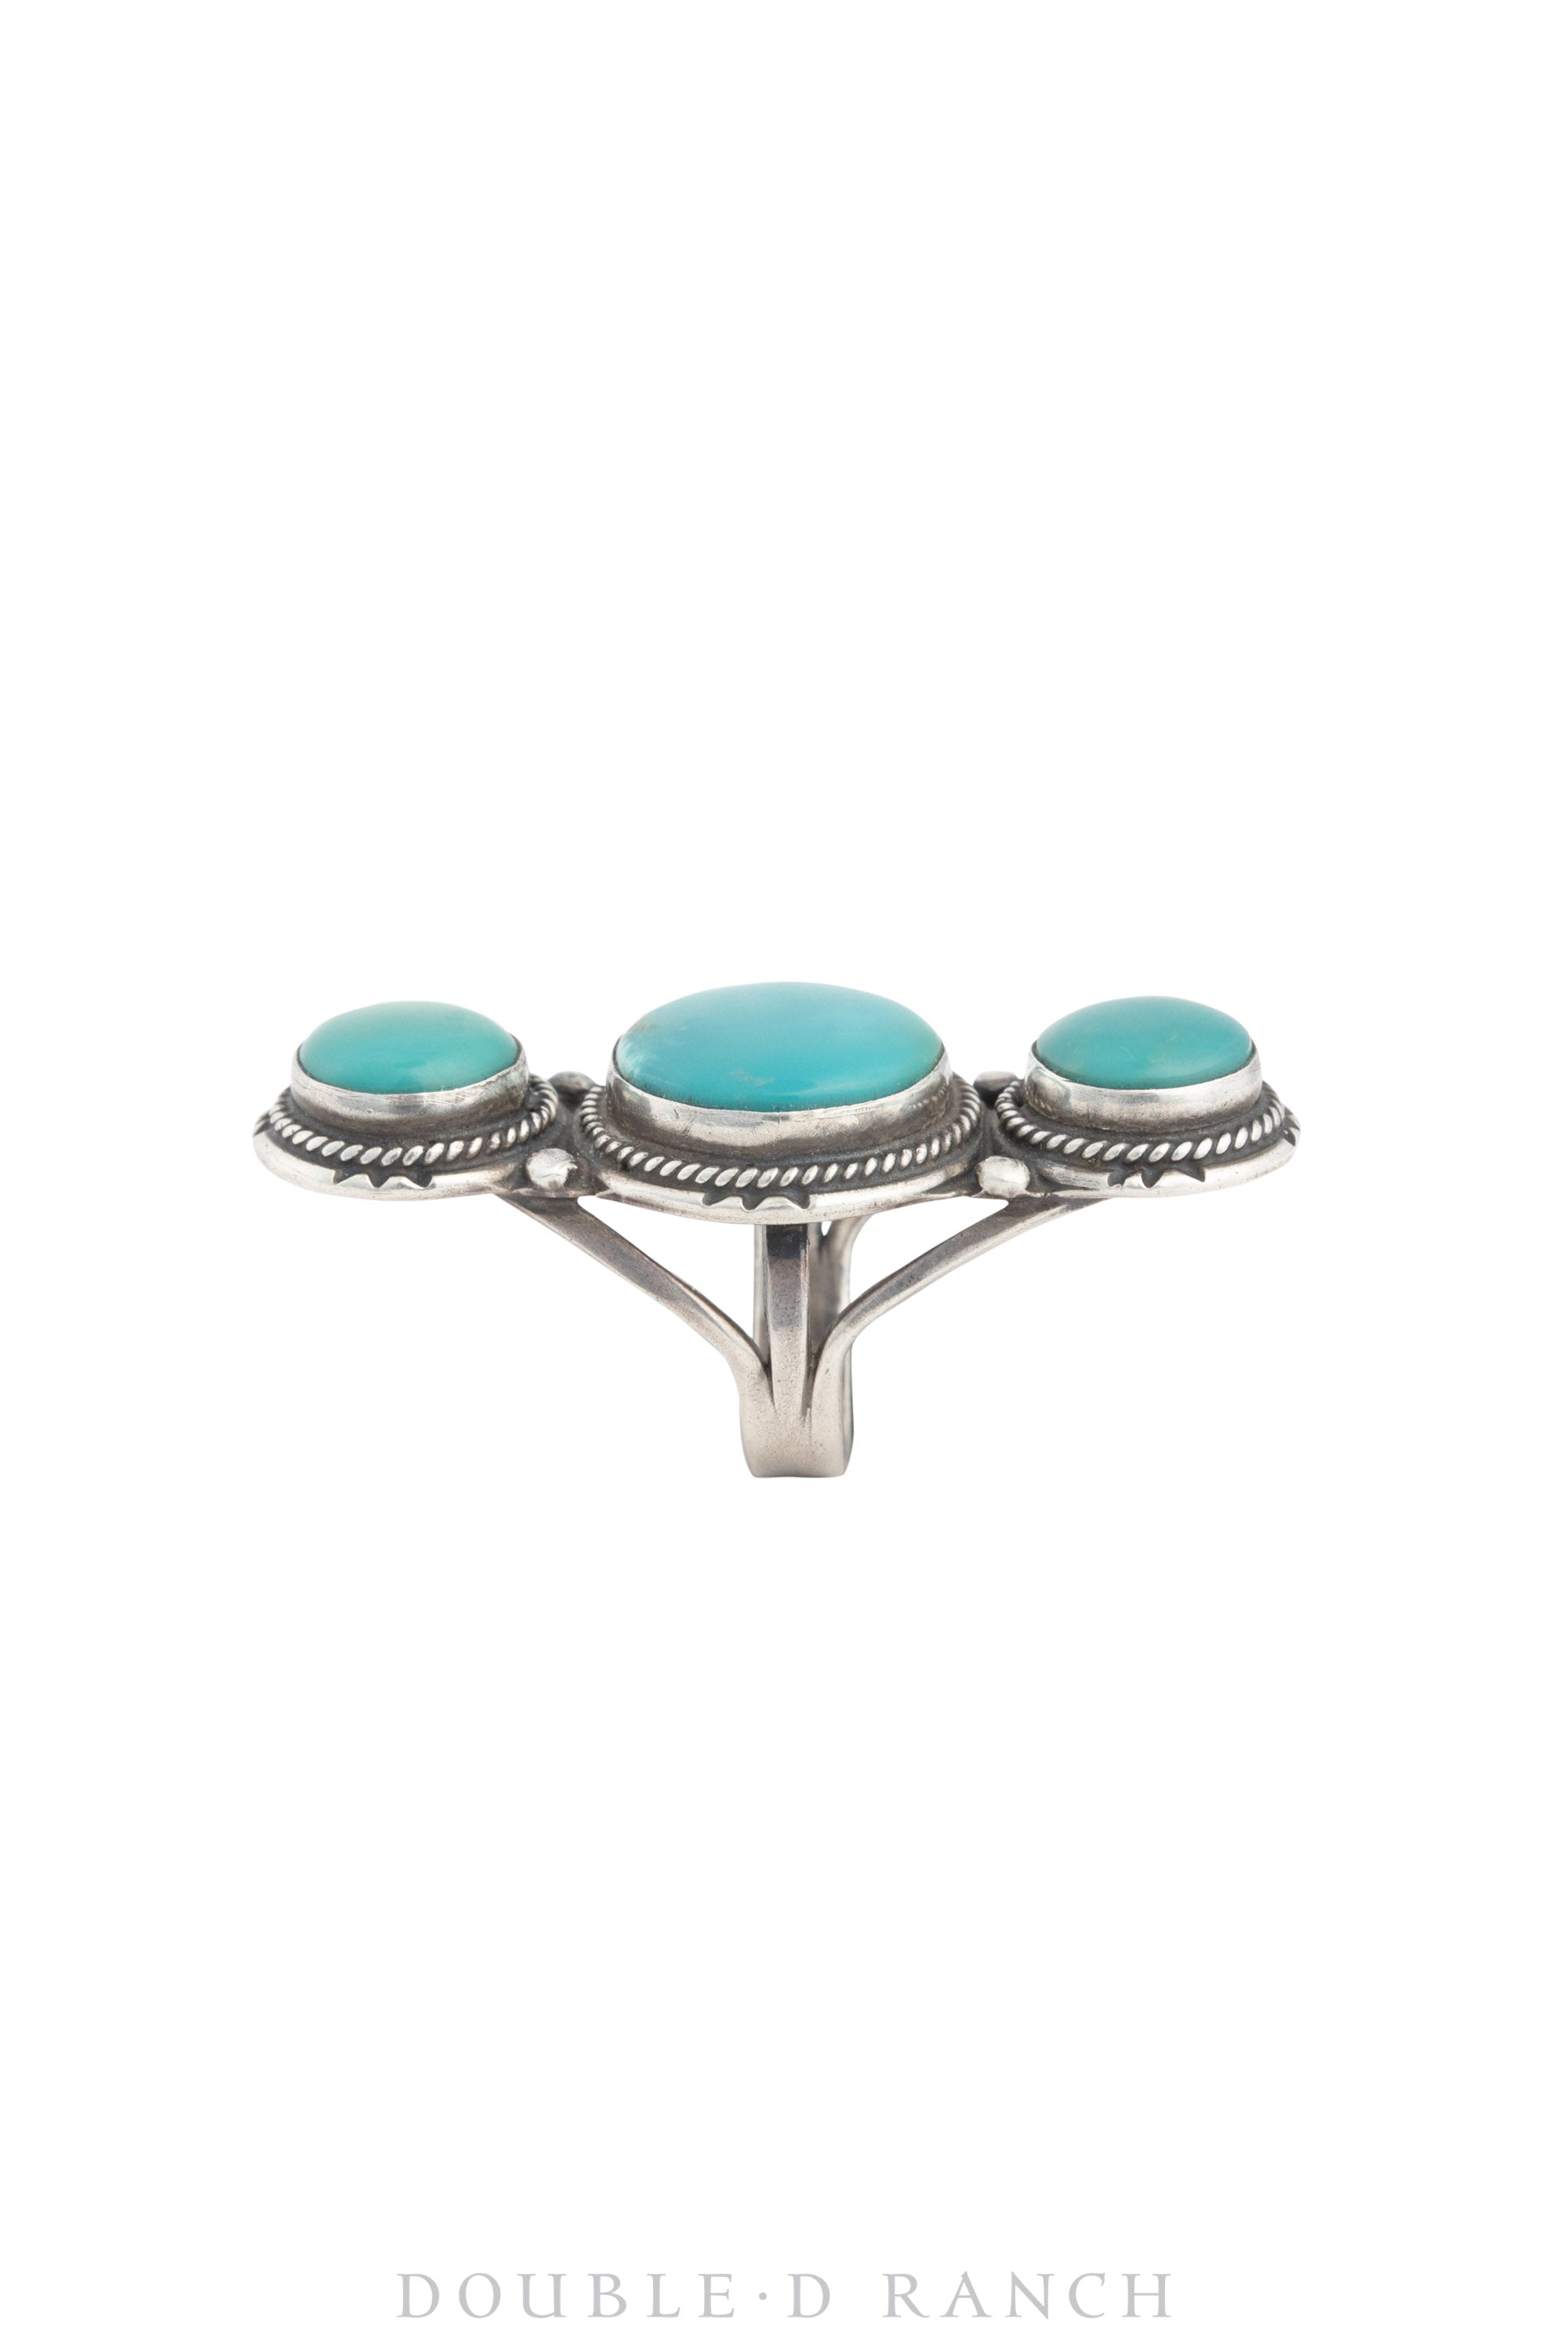 Ring, Natural Stone, Turquoise, Vintage ‘50s, 1381